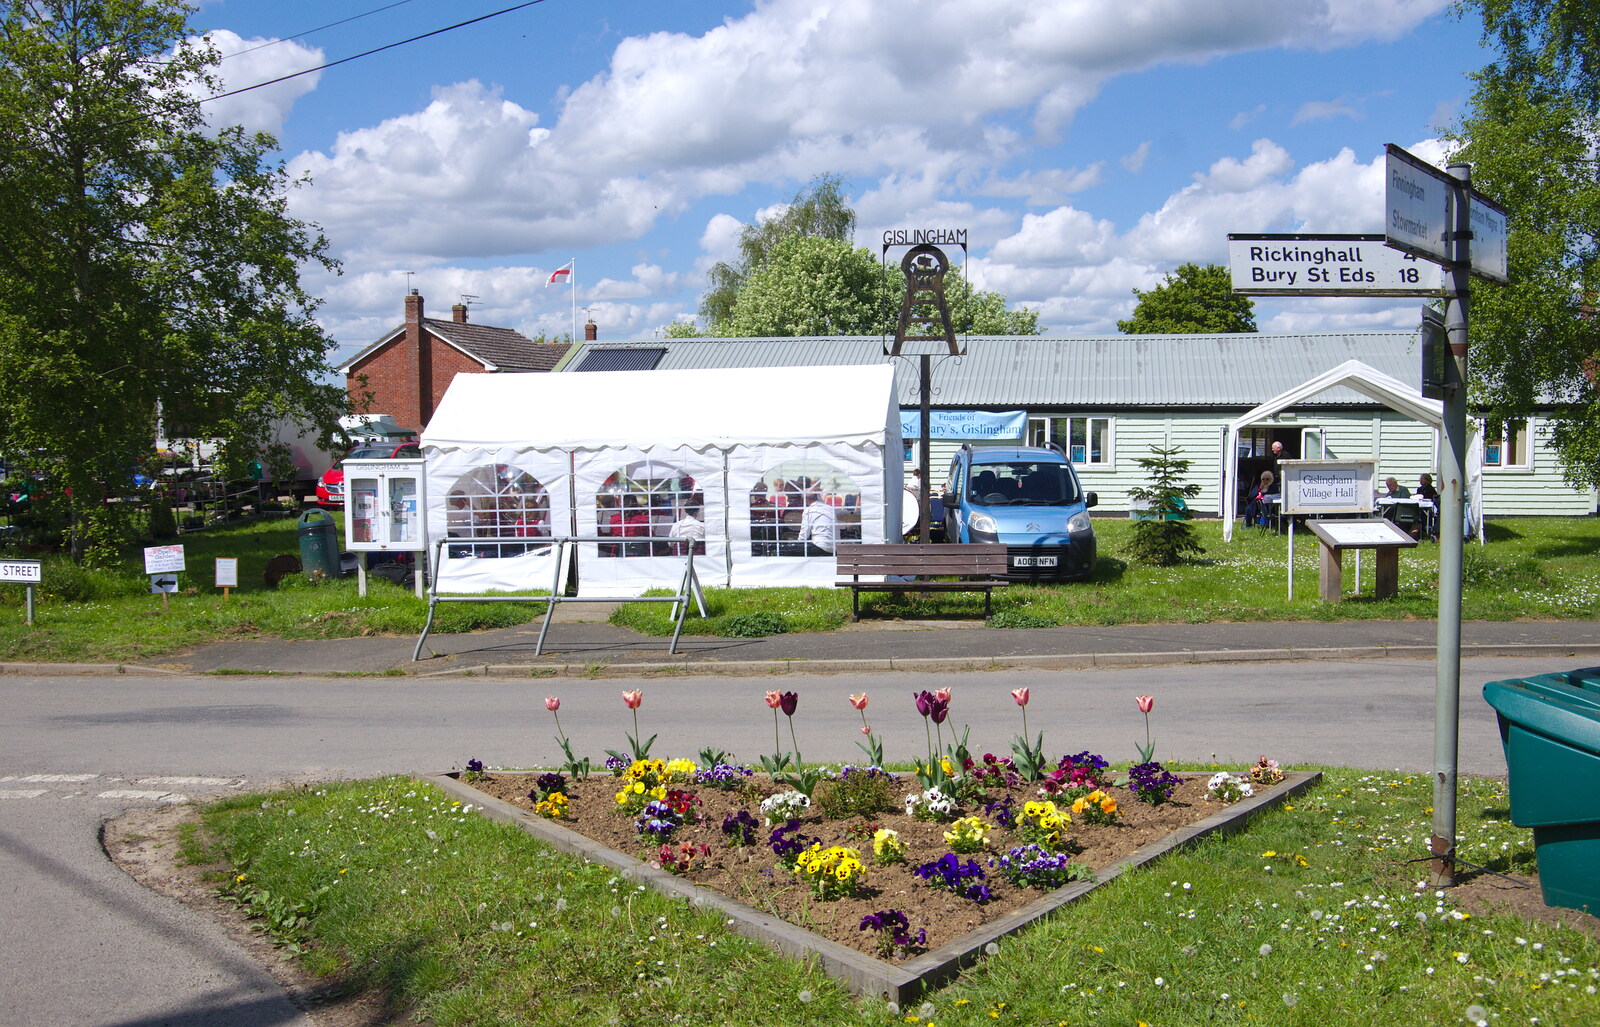 A view of the marquee and the village sign from The Gislingham Silver Band at the Village Hall, Gislingham, Suffolk - 12th May 2019